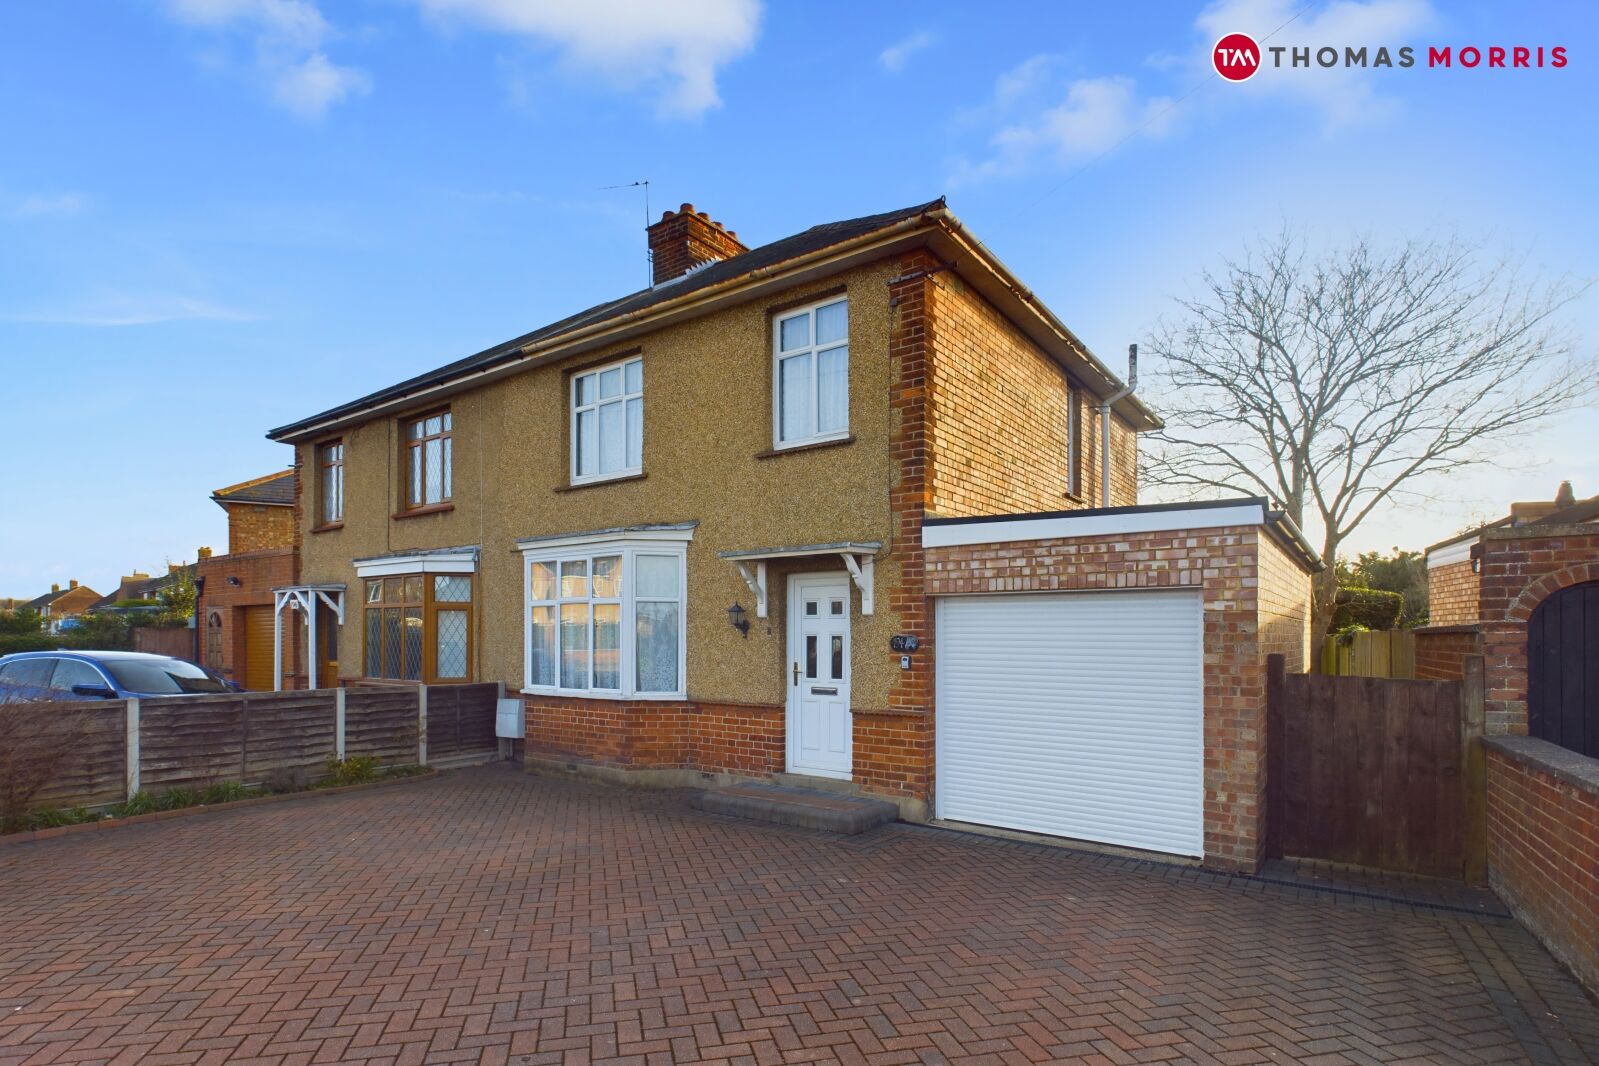 3 bedroom semi detached house for sale Drove Road, Biggleswade, SG18, main image